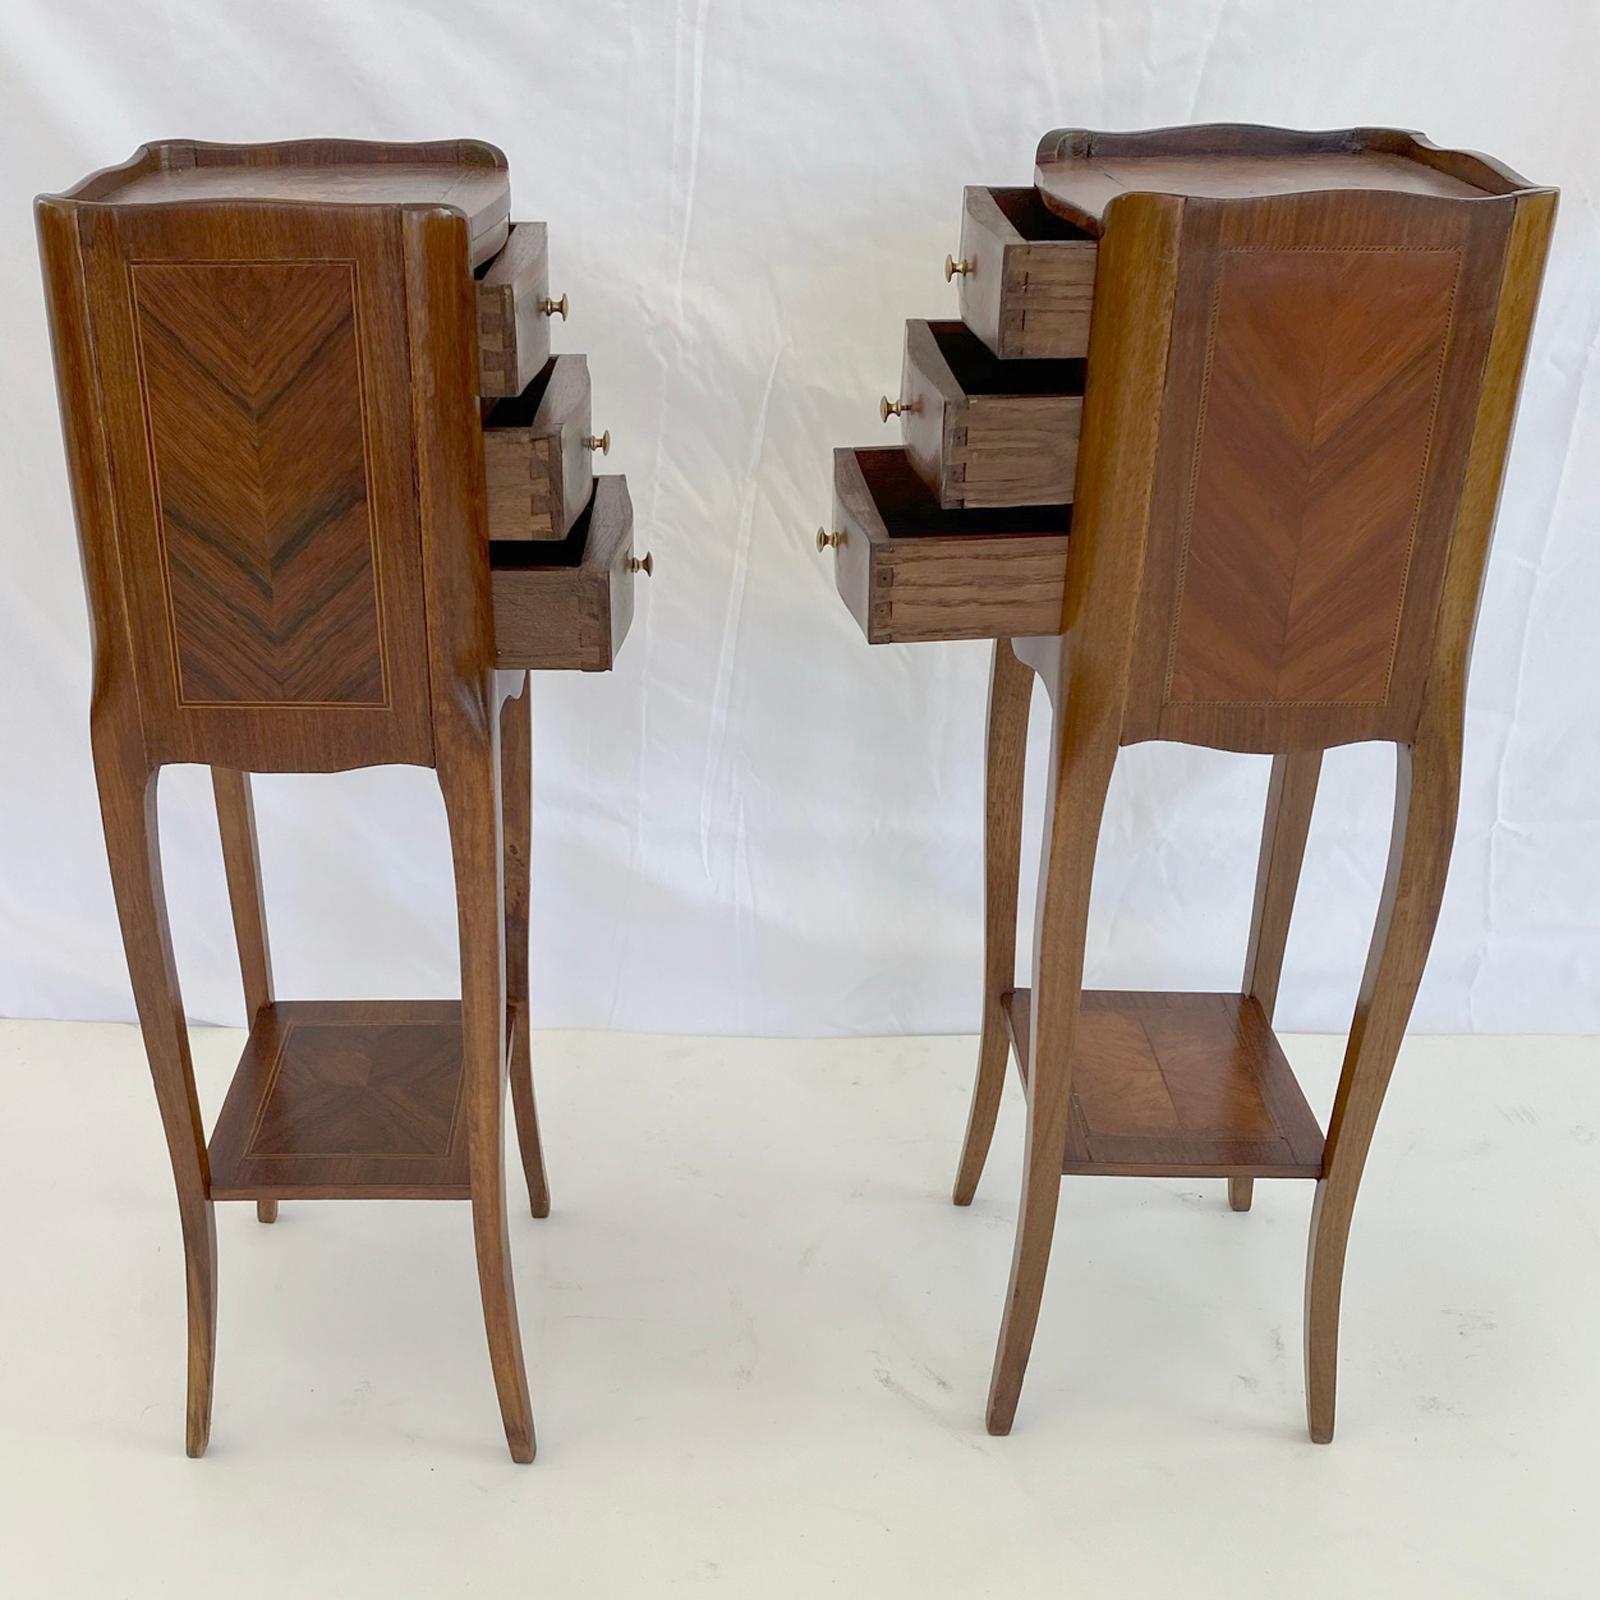 Pair of Petite Inlaid Candlestand Bedside Chests 1